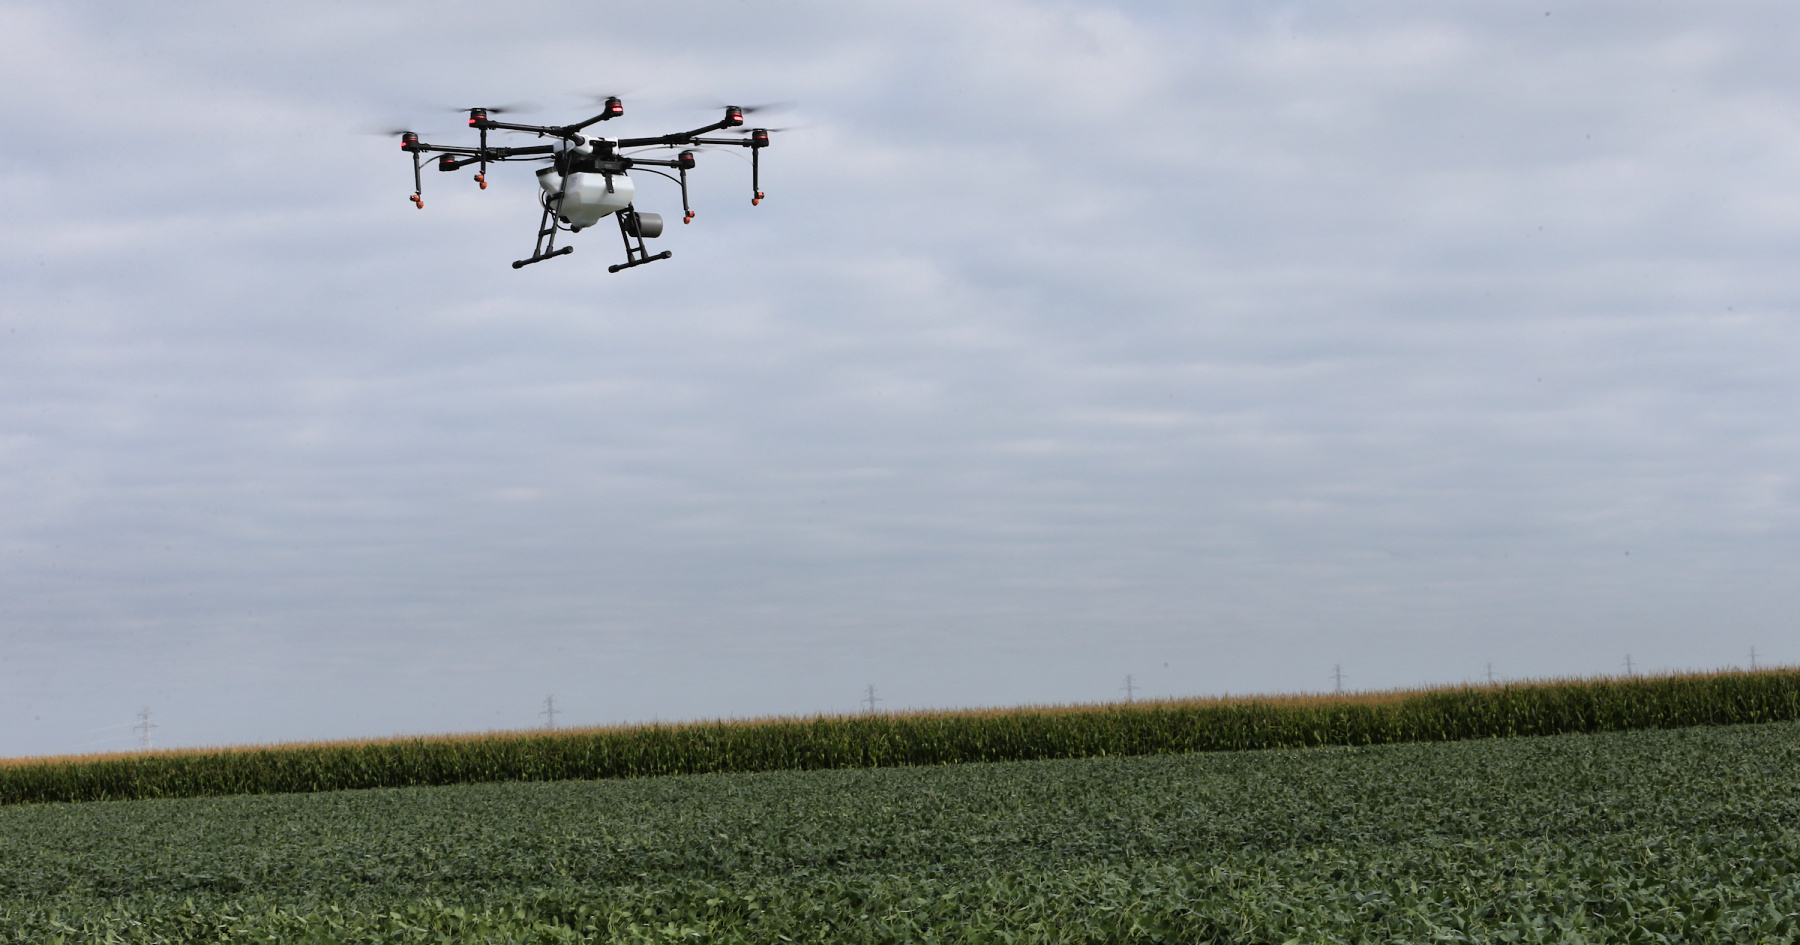 Drone in Air Over Corn Field